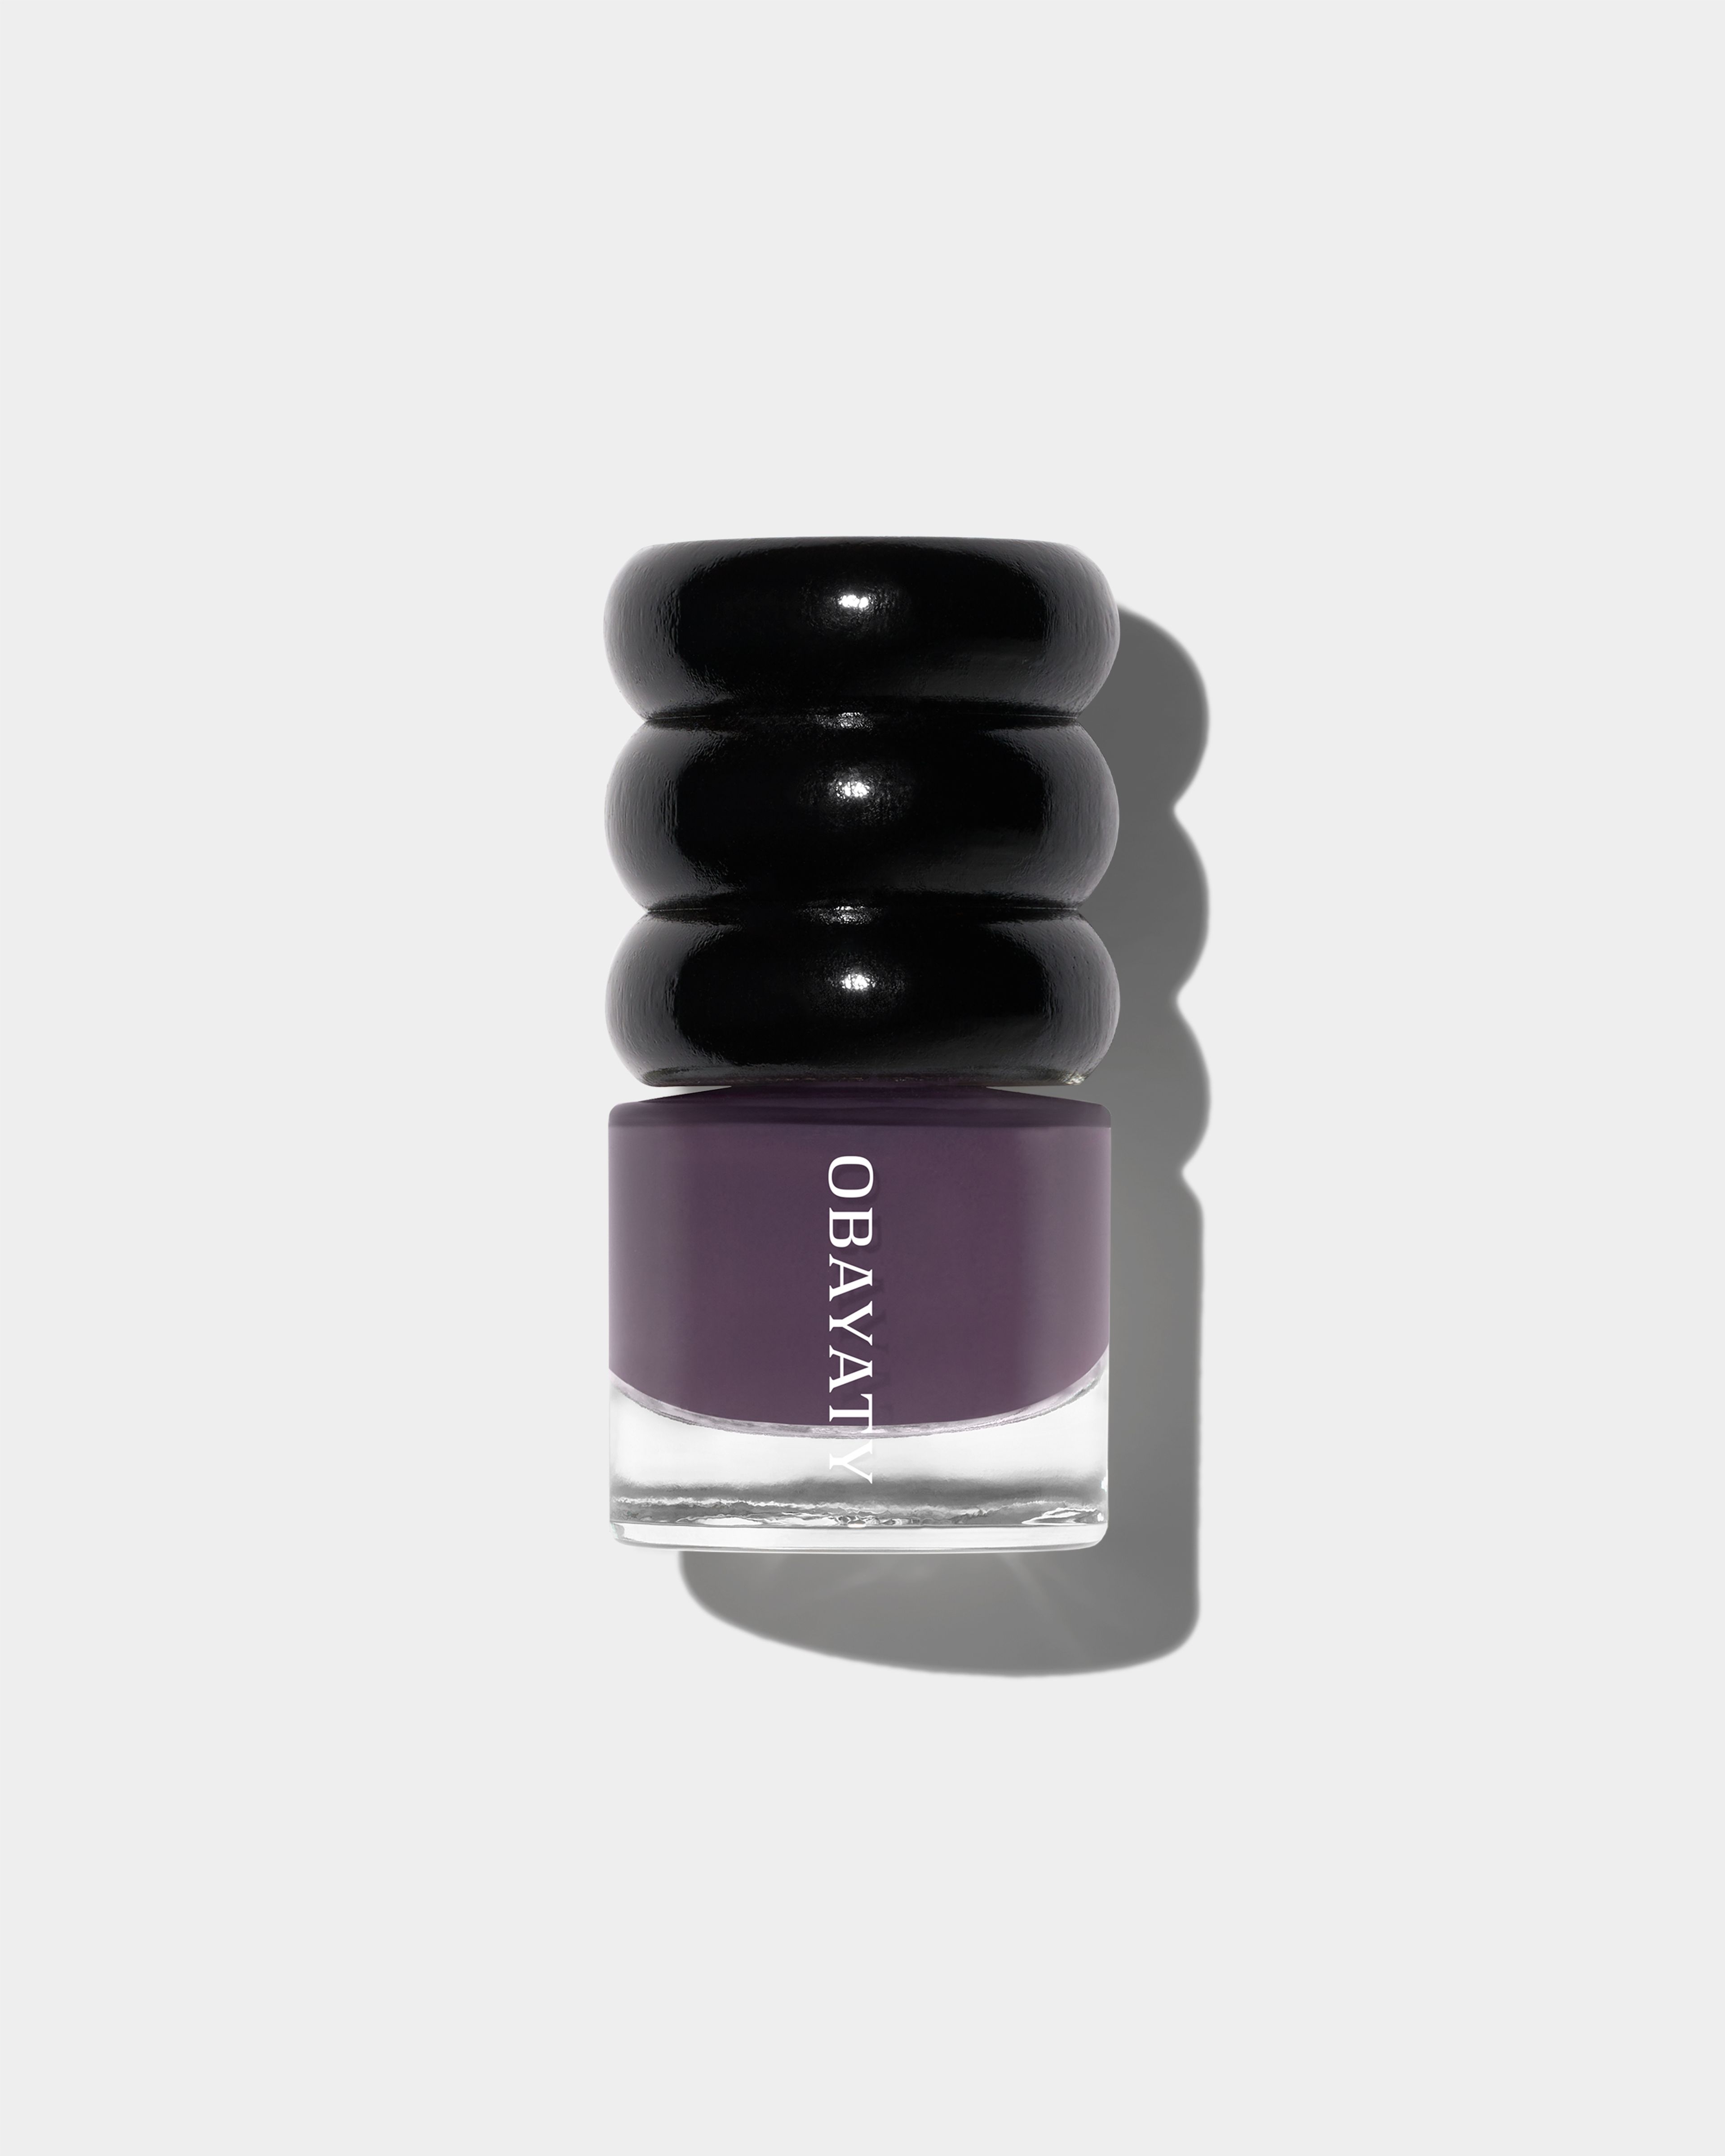 Nail polish in the color violet dusk laying on a grey surface